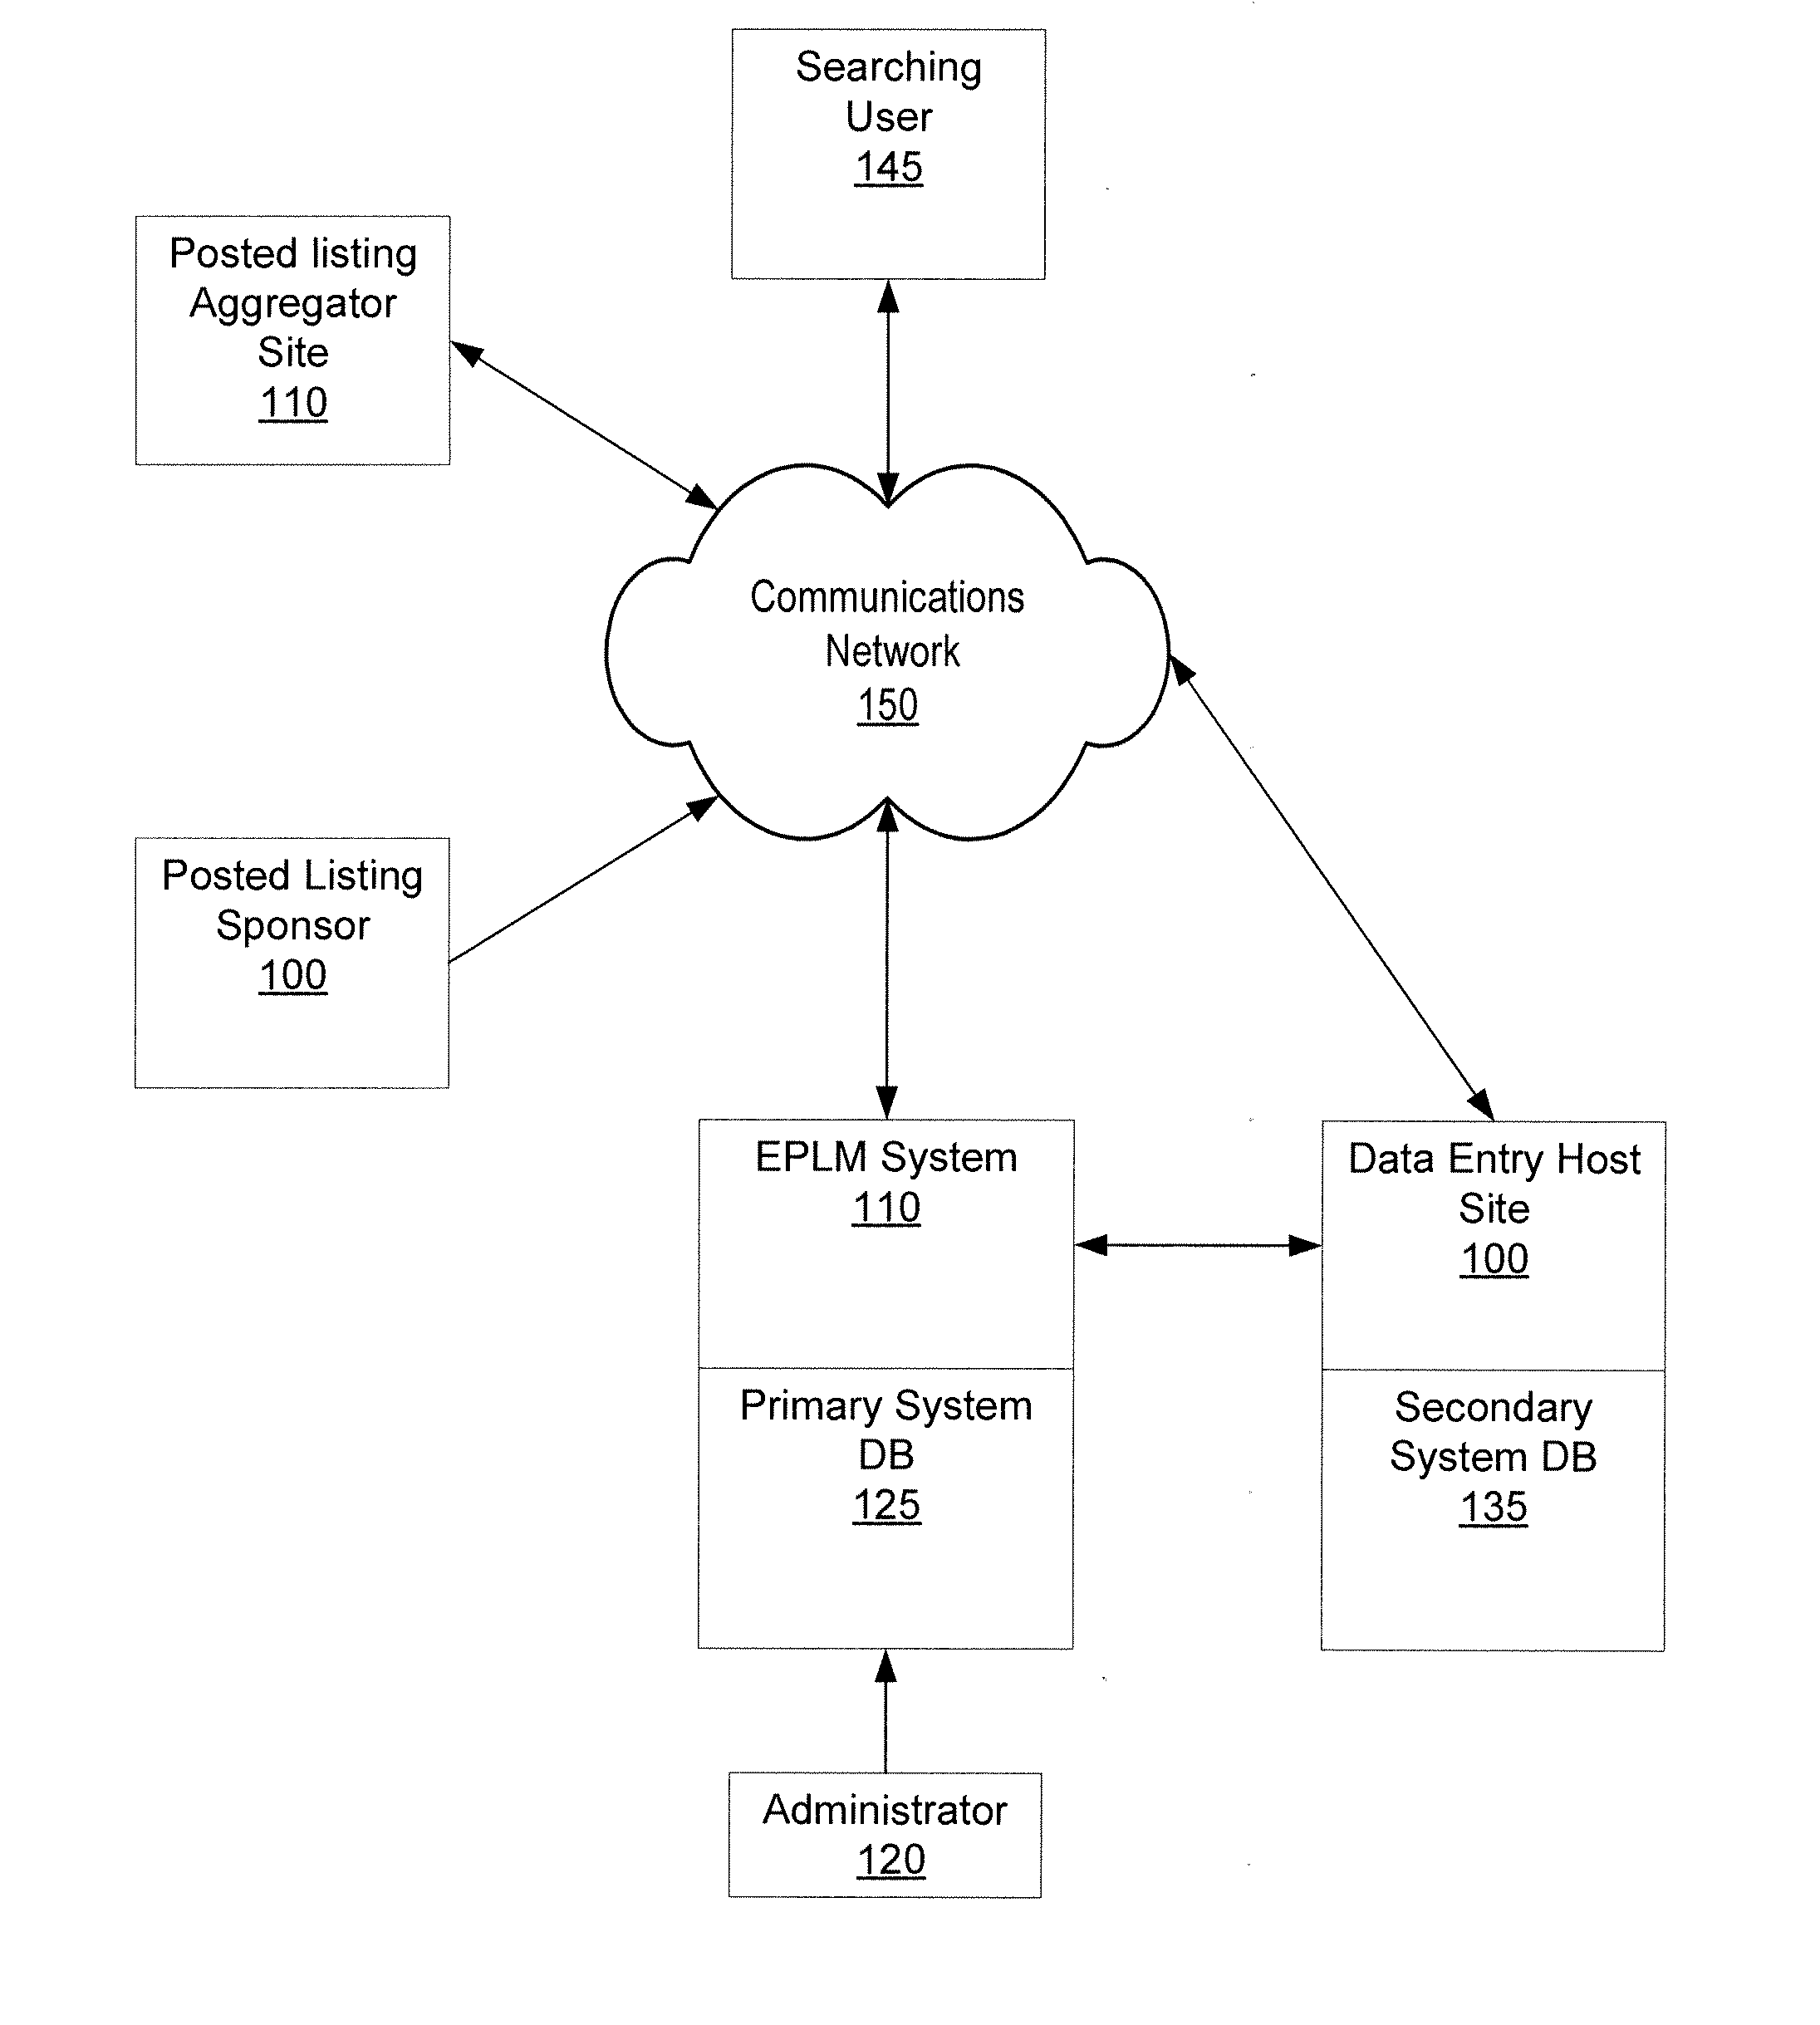 Apparatuses, methods and systems for enhanced posted listing generation and distribution management